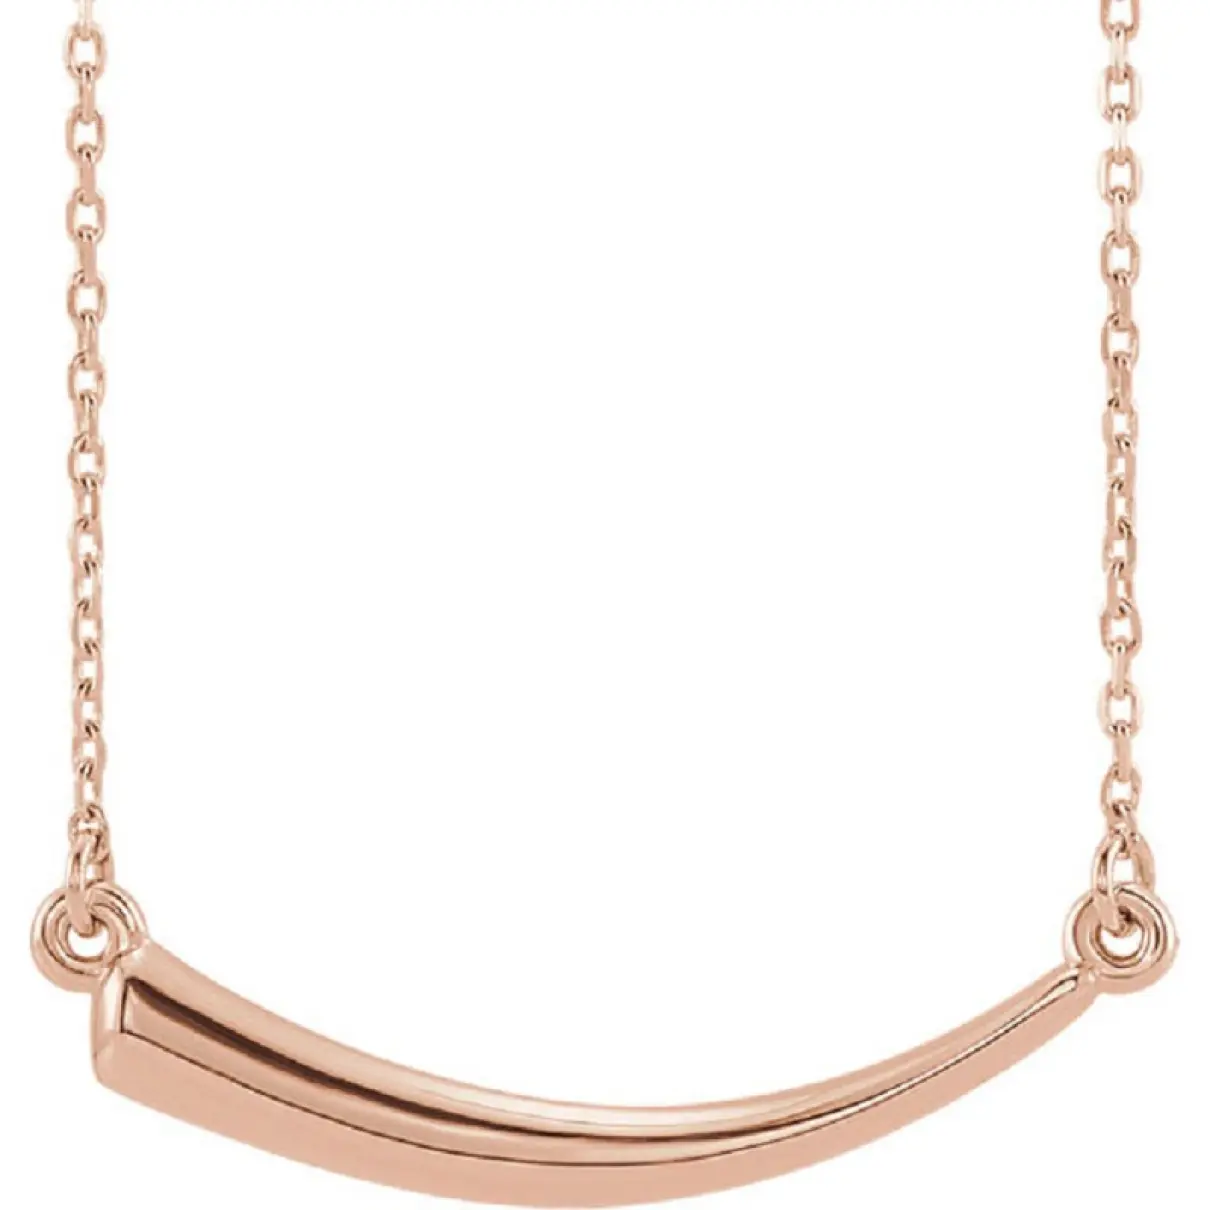 Buy Apples of Gold Pink gold necklace online